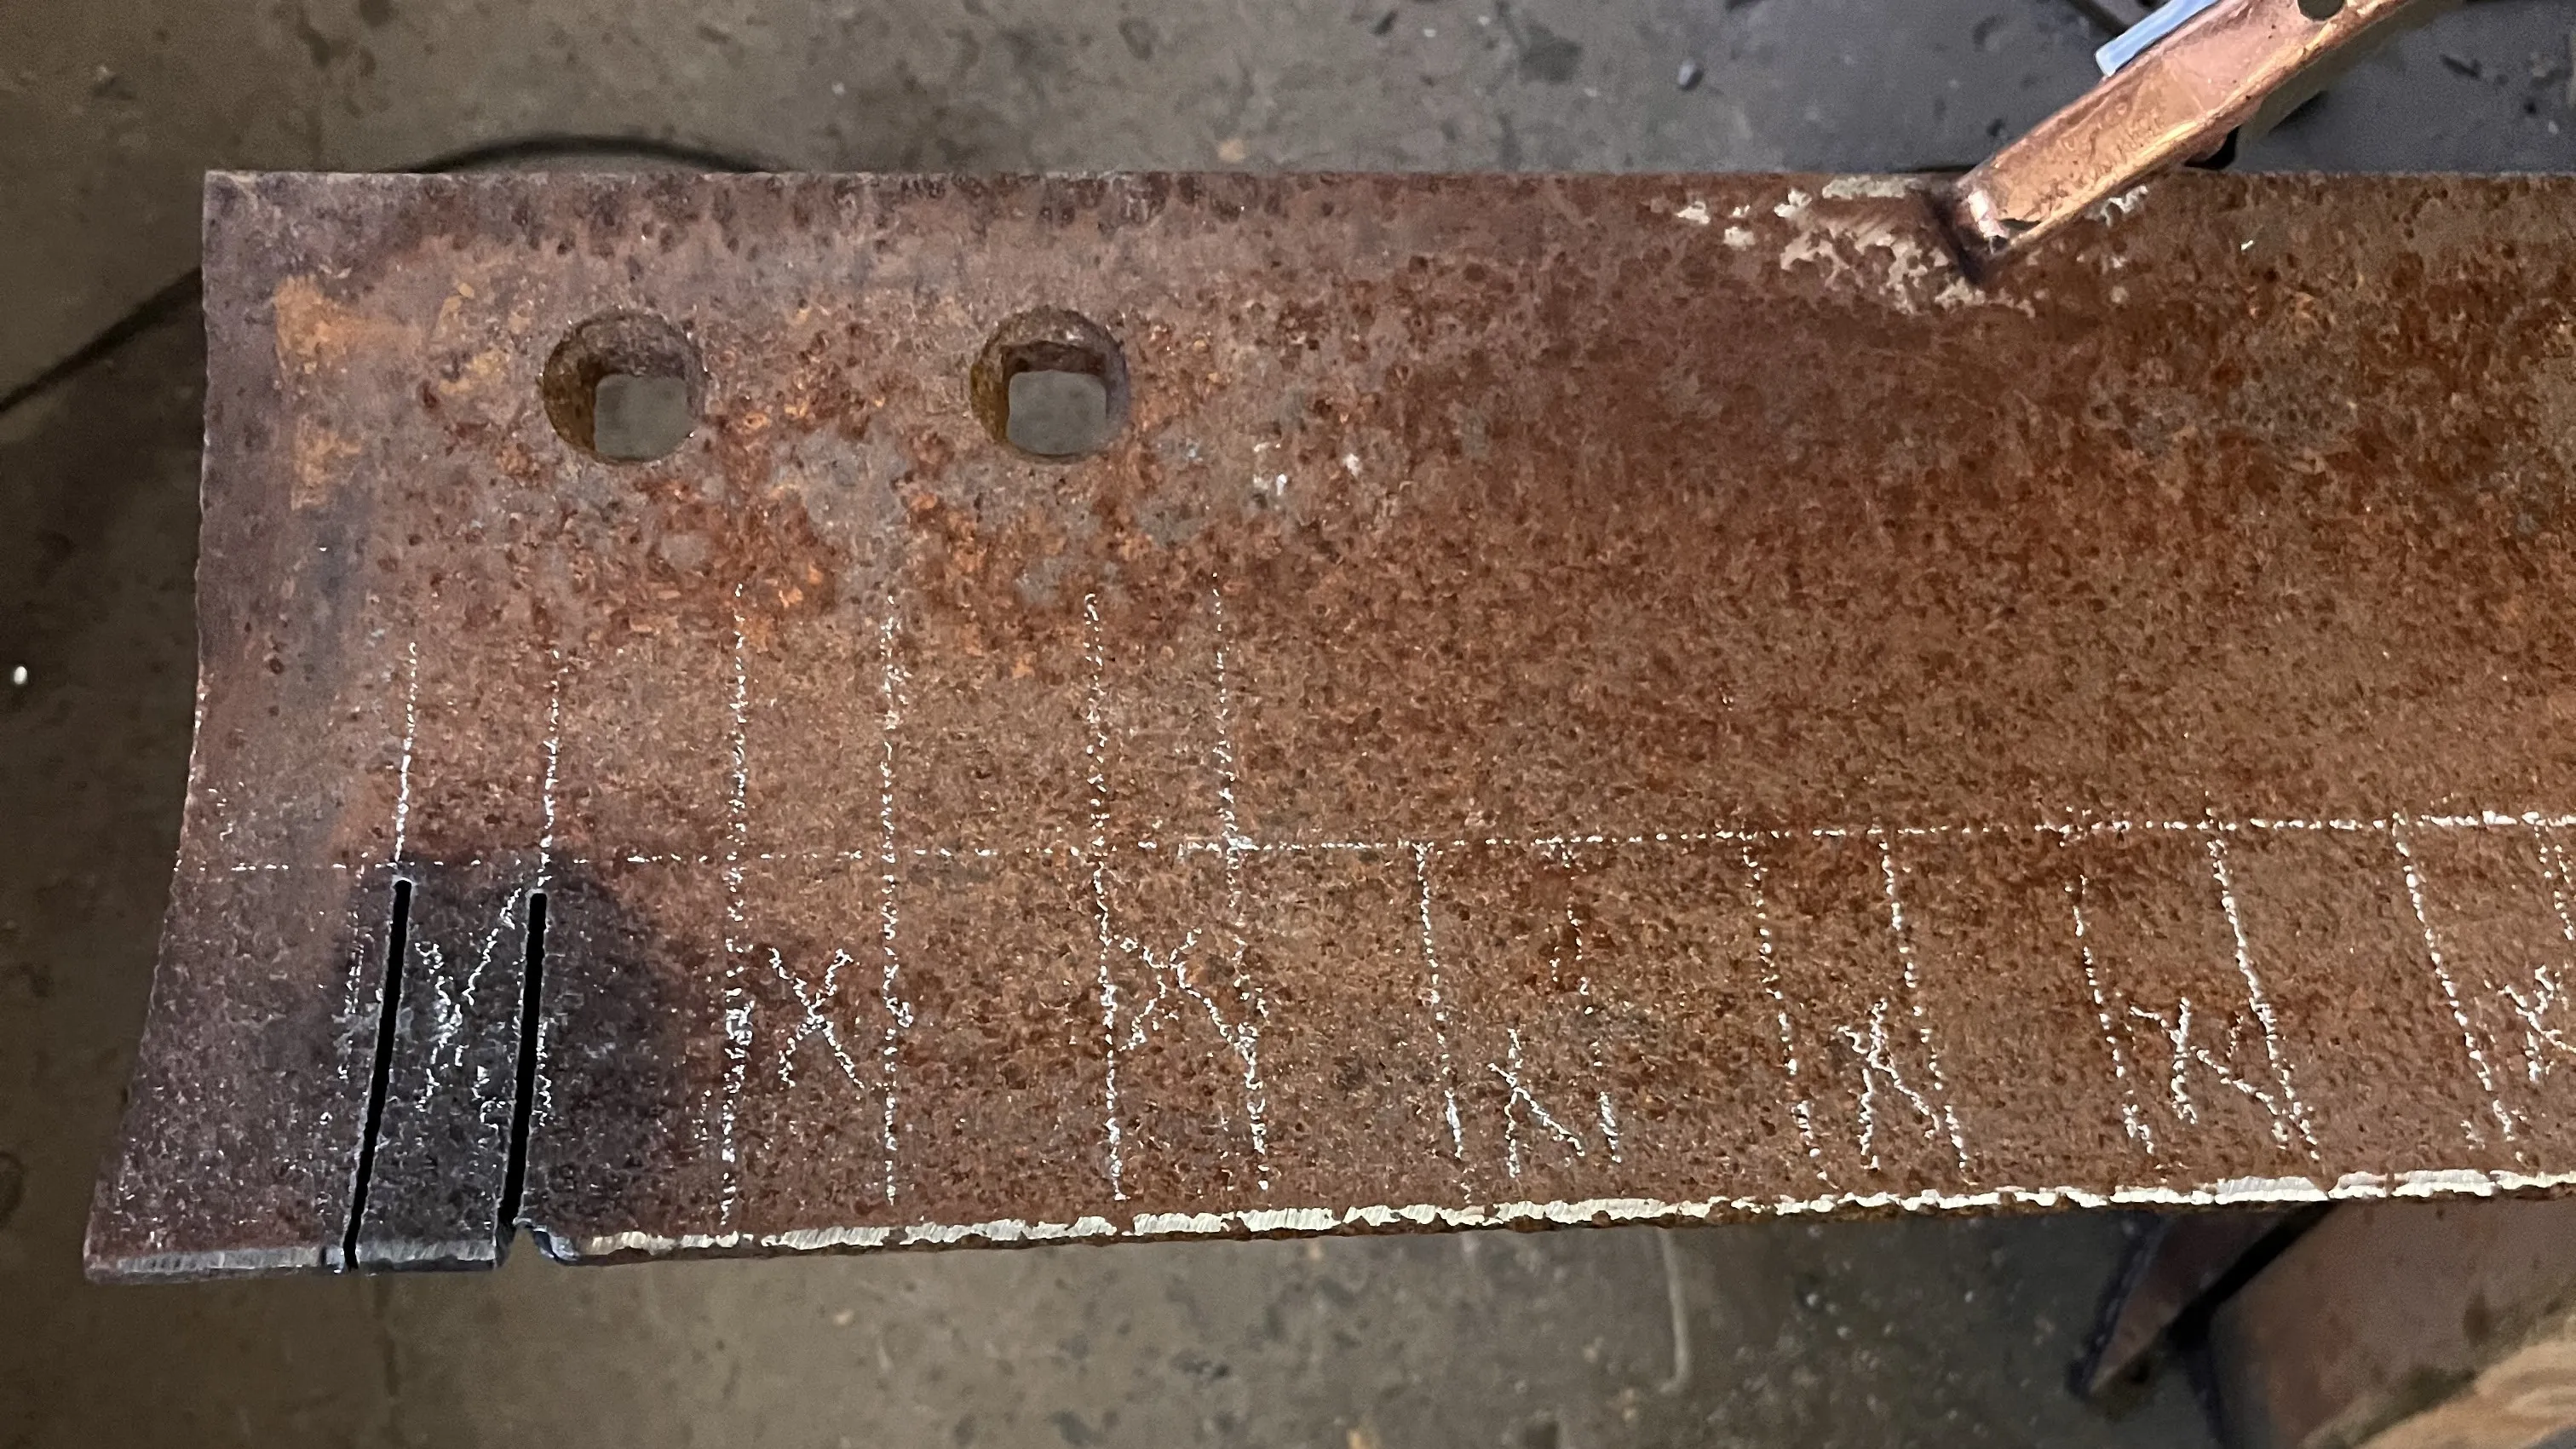 An image of a grader blade with markings being prepared for cutting out notches.